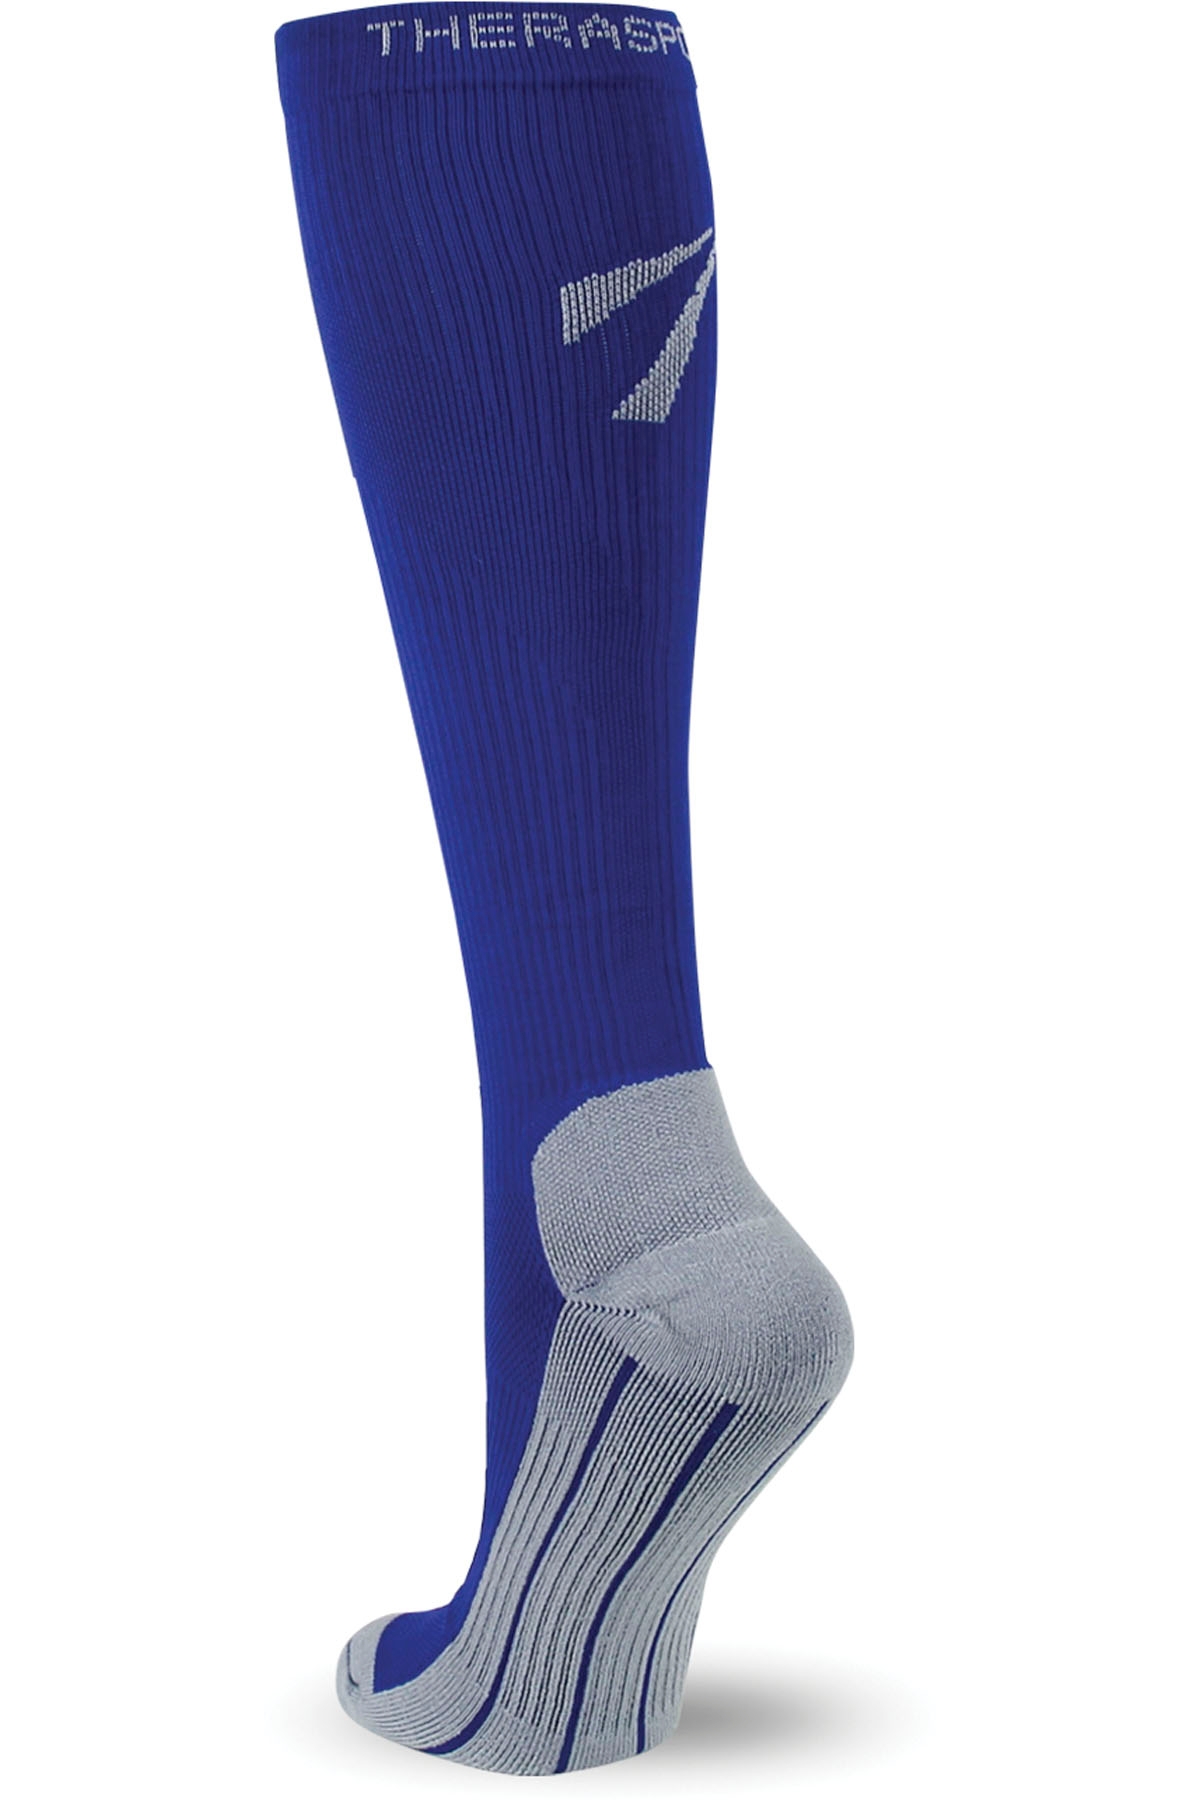 Therafirm Unisex Compression Knee High Recovery Sock-TF374